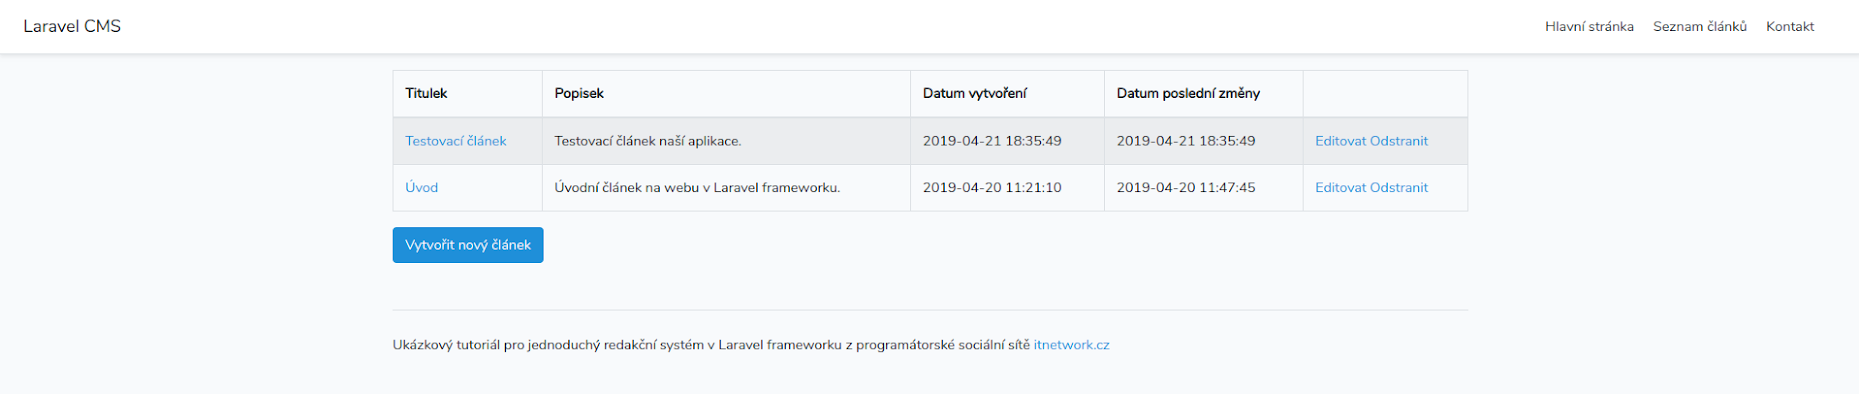 List of articles in the administration in the Laravel CMS - Laravel Framework for PHP